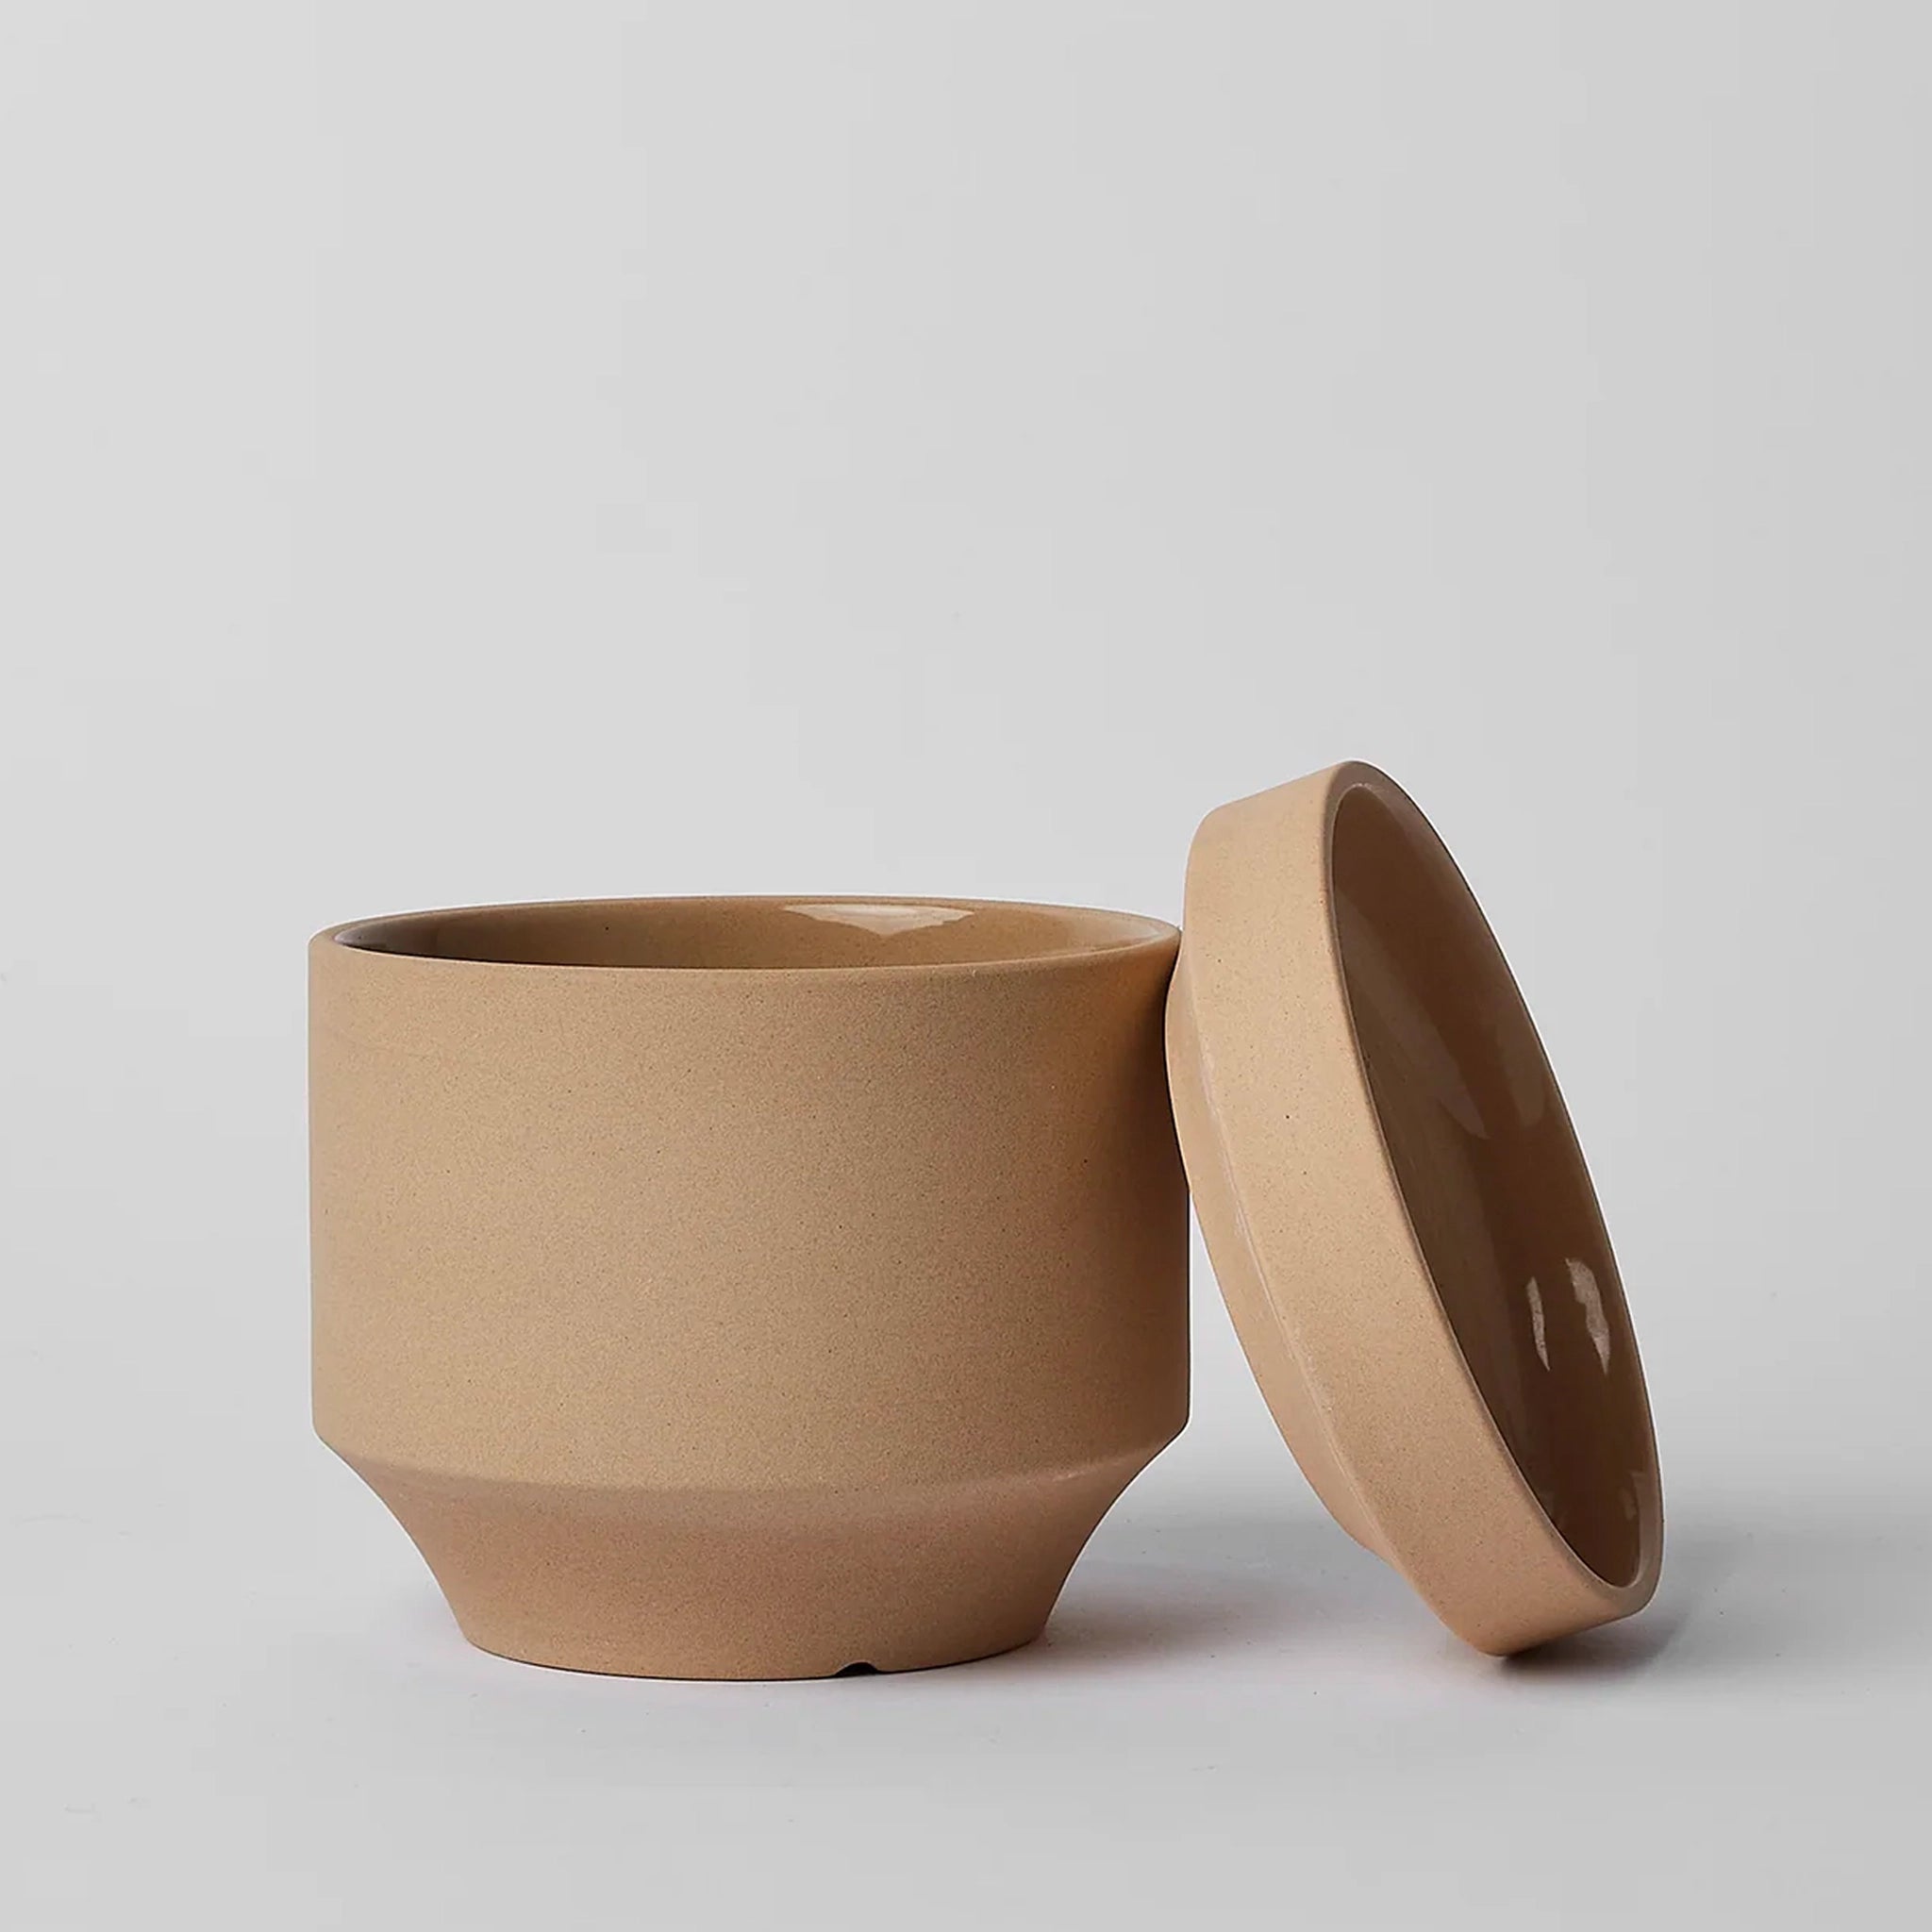 On a neutral background is a tan ceramic planter with a thick removable tray for watering